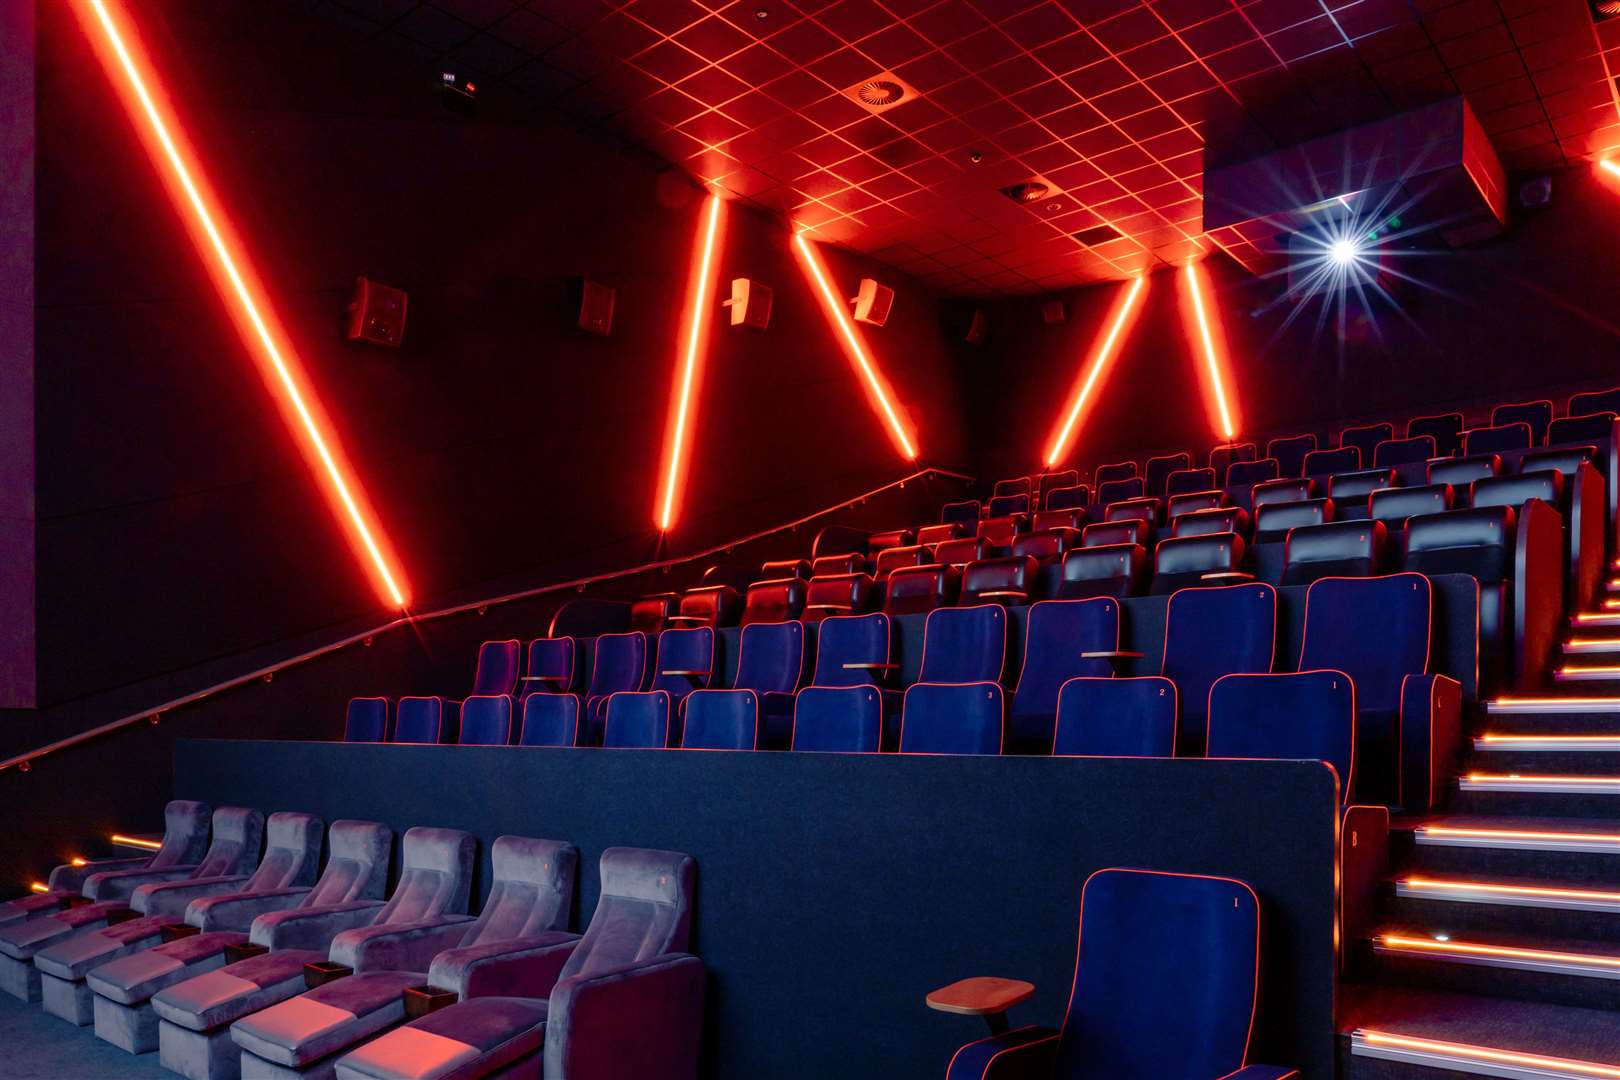 A glimpse at one of the auditoriums at The Light Cinema, Sittingbourne